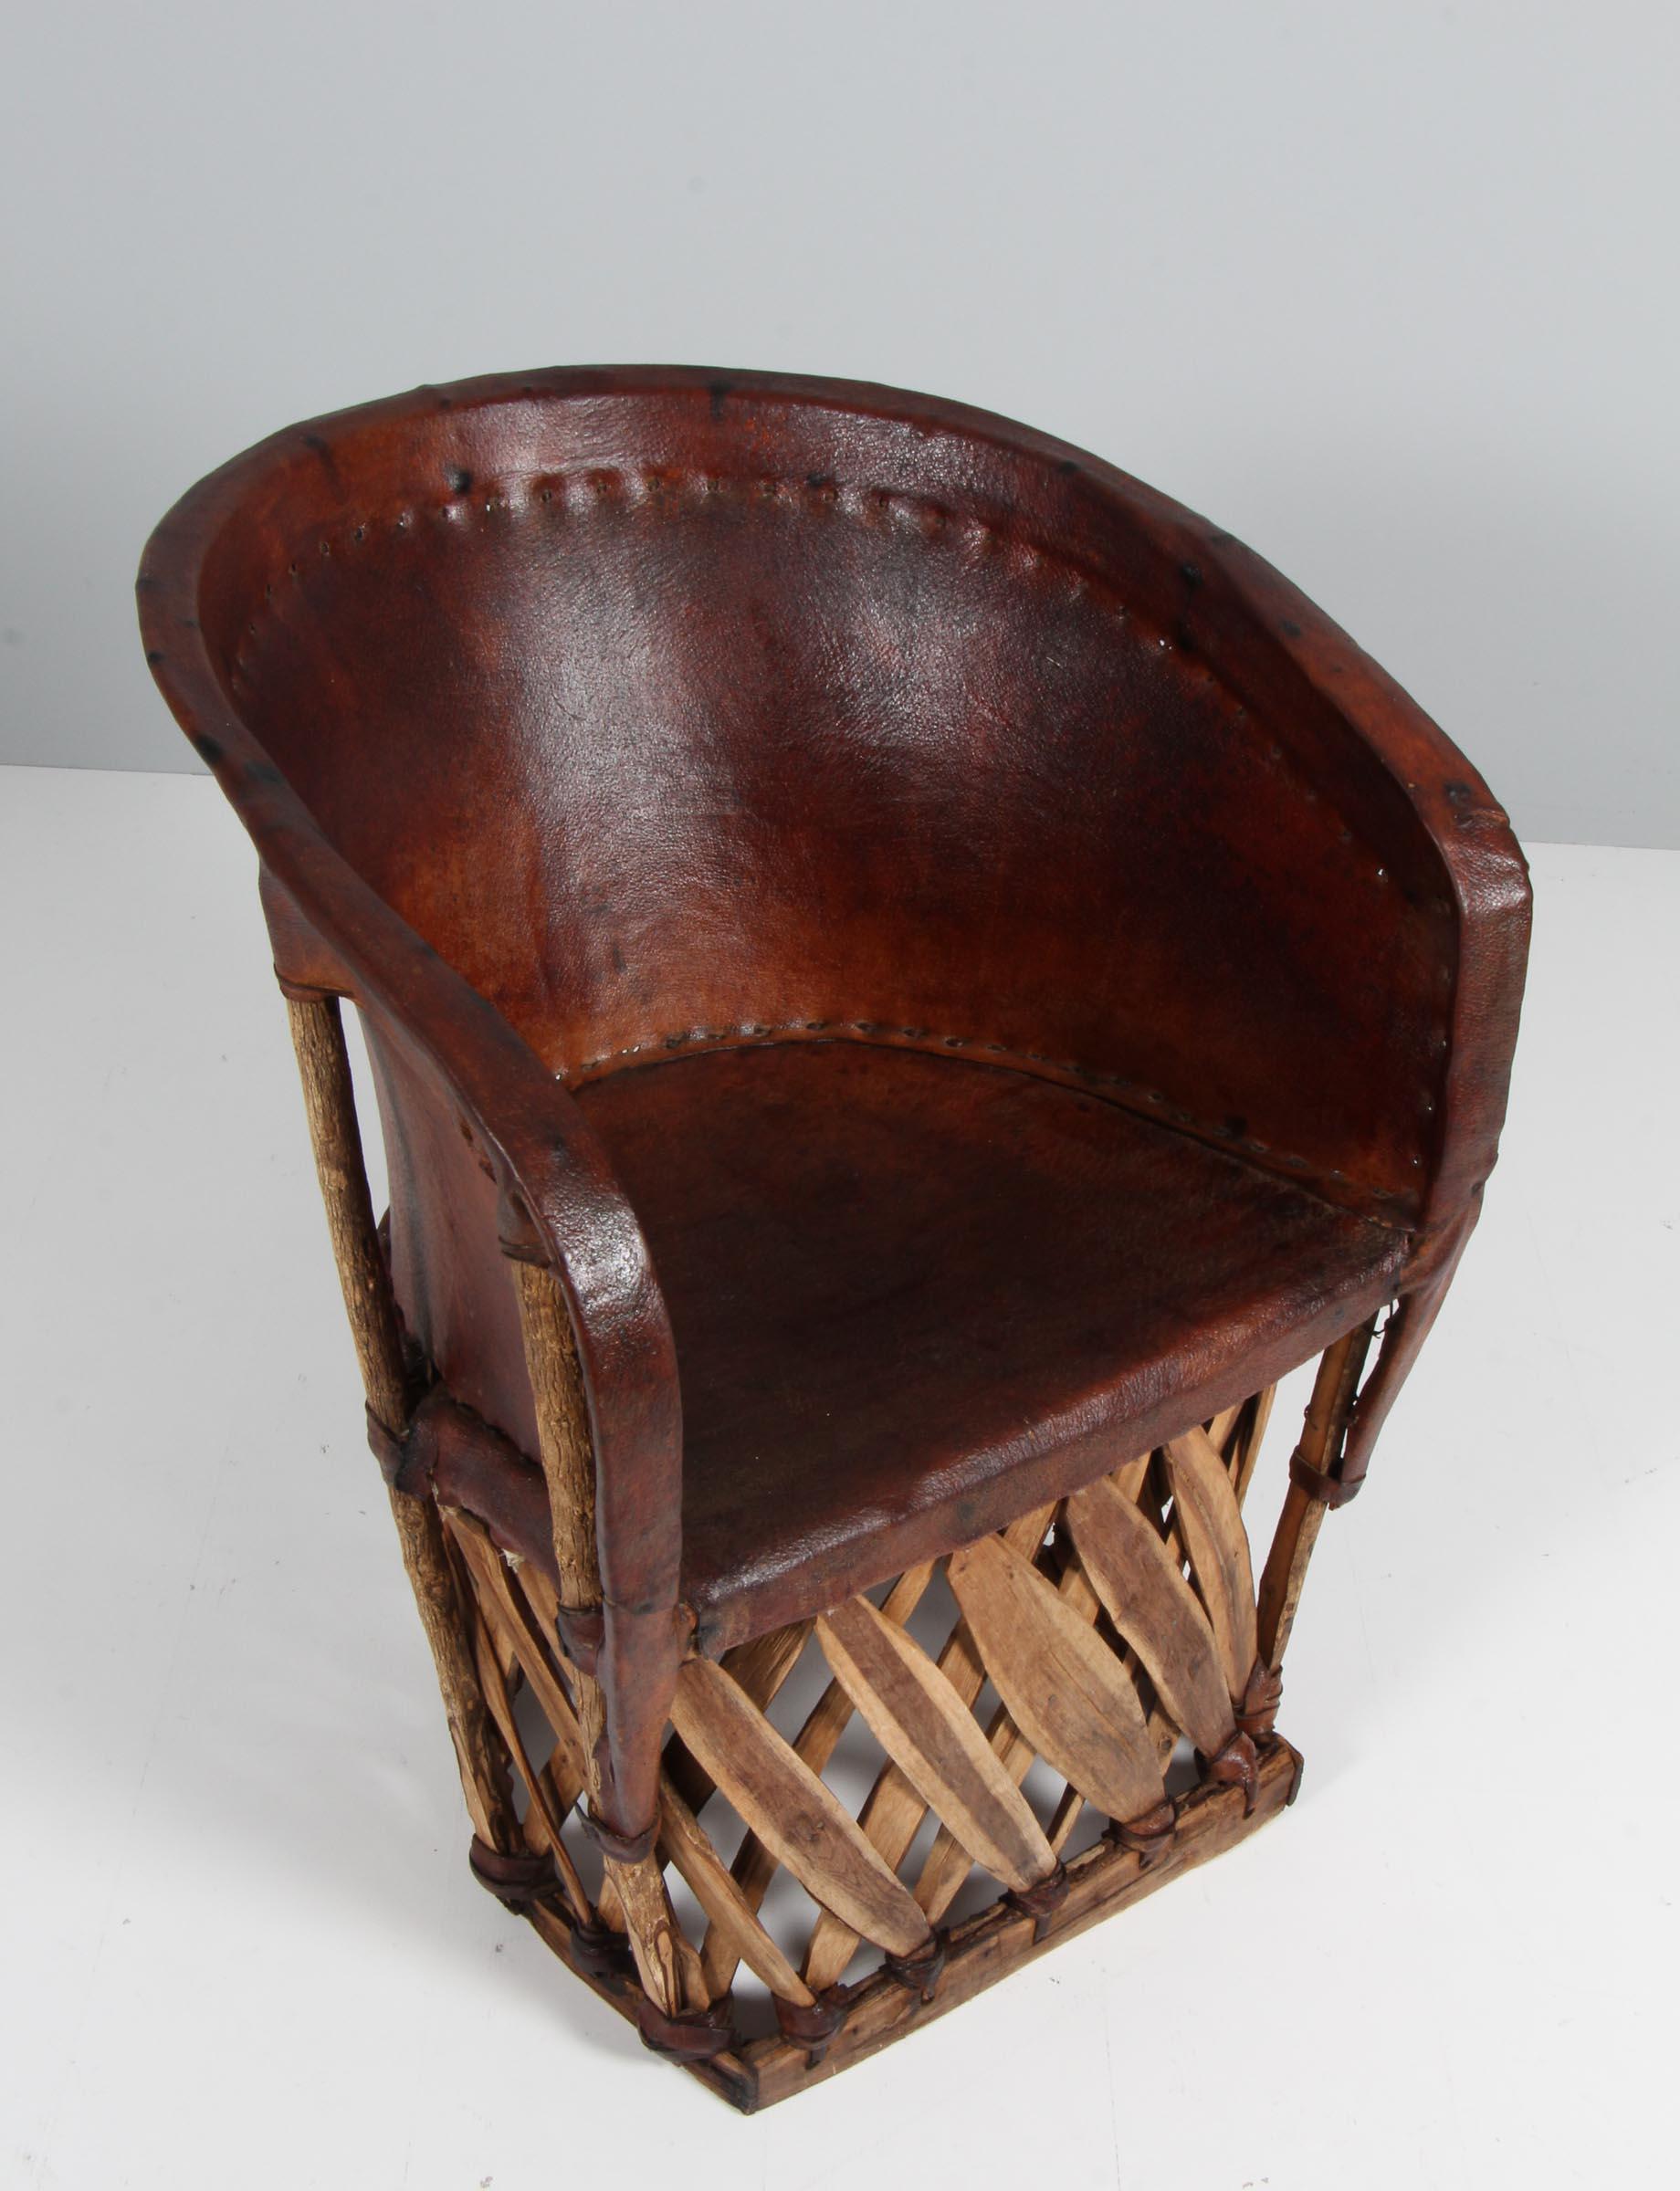 South American lounge chair made of palm tree wood and patinated leather.

Made in the 20th century.